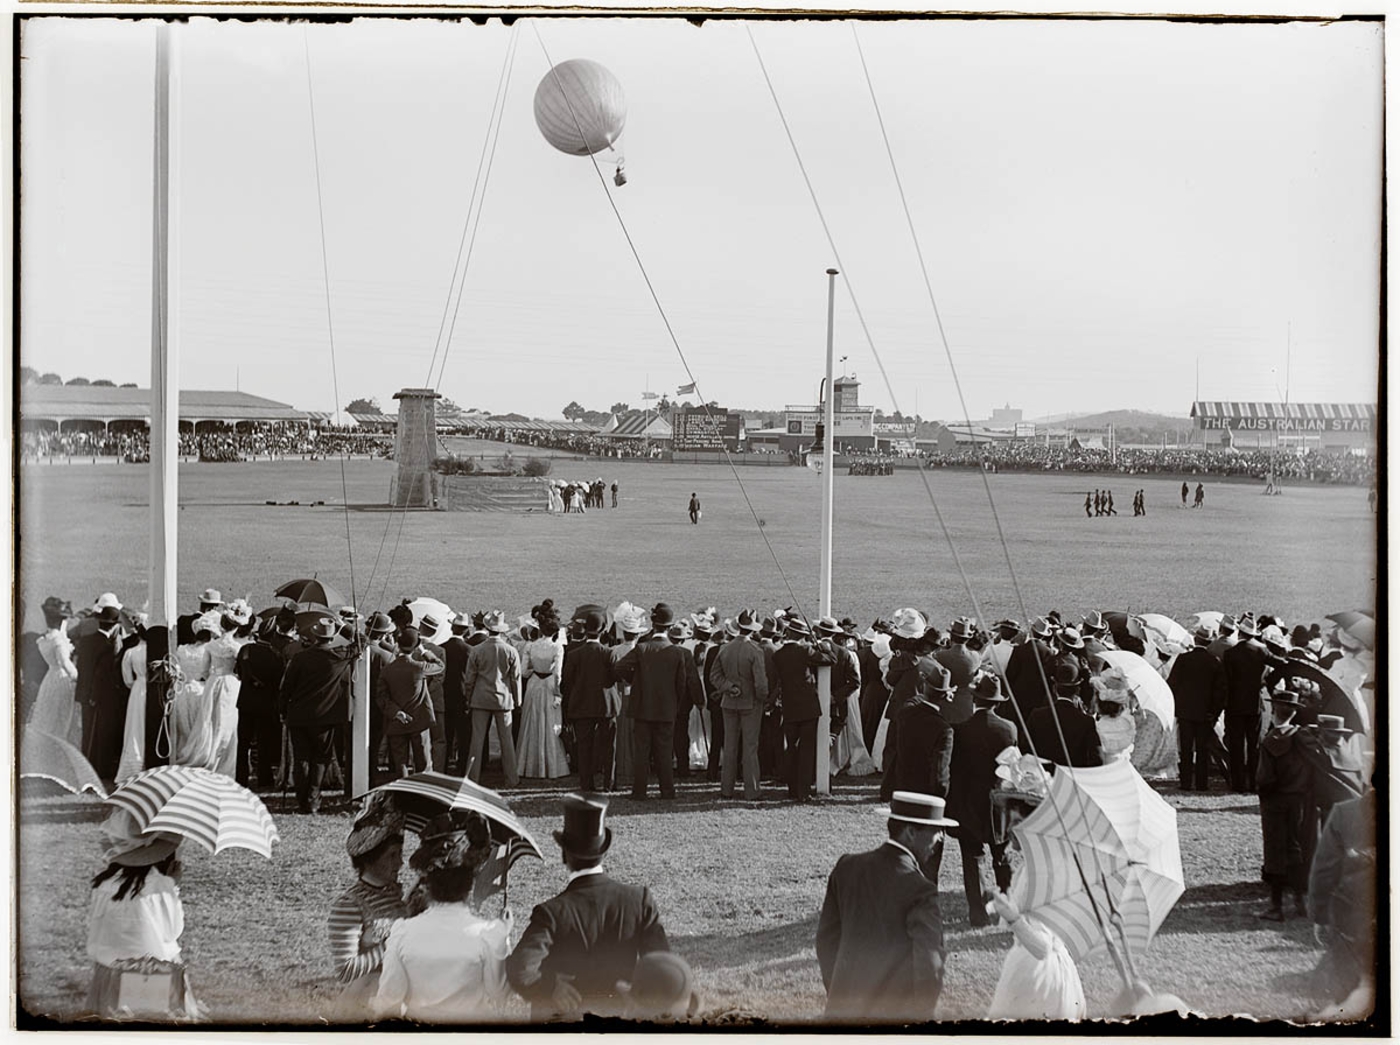 Box 35: Commonwealth balloon ascent [Gas balloon displayed at the royal Agricultural Showground, Sydney, January 1901] / photographed by W. H. Macguire